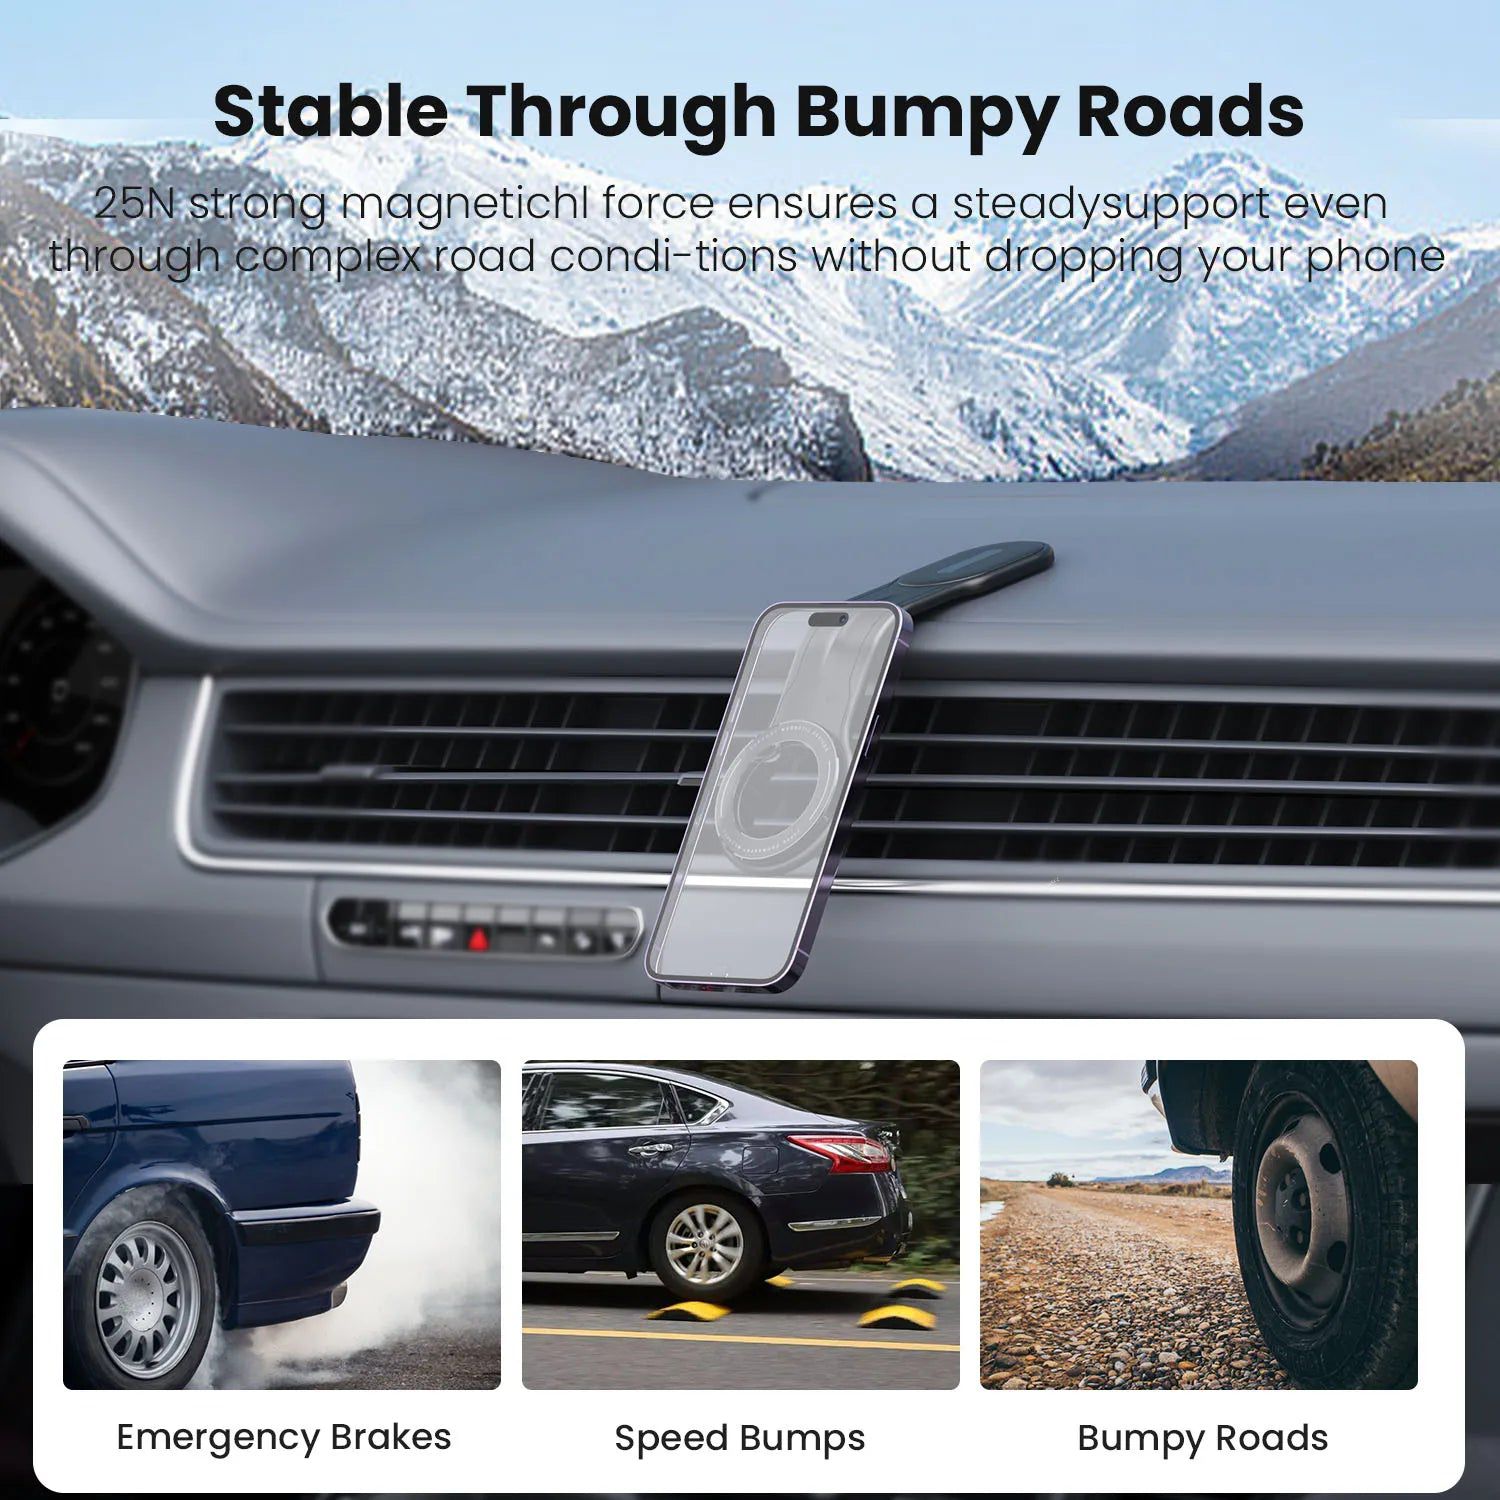 Moxedo Magnetic Car Mount Phone Holder keeps the mobile stable in bumpy roads